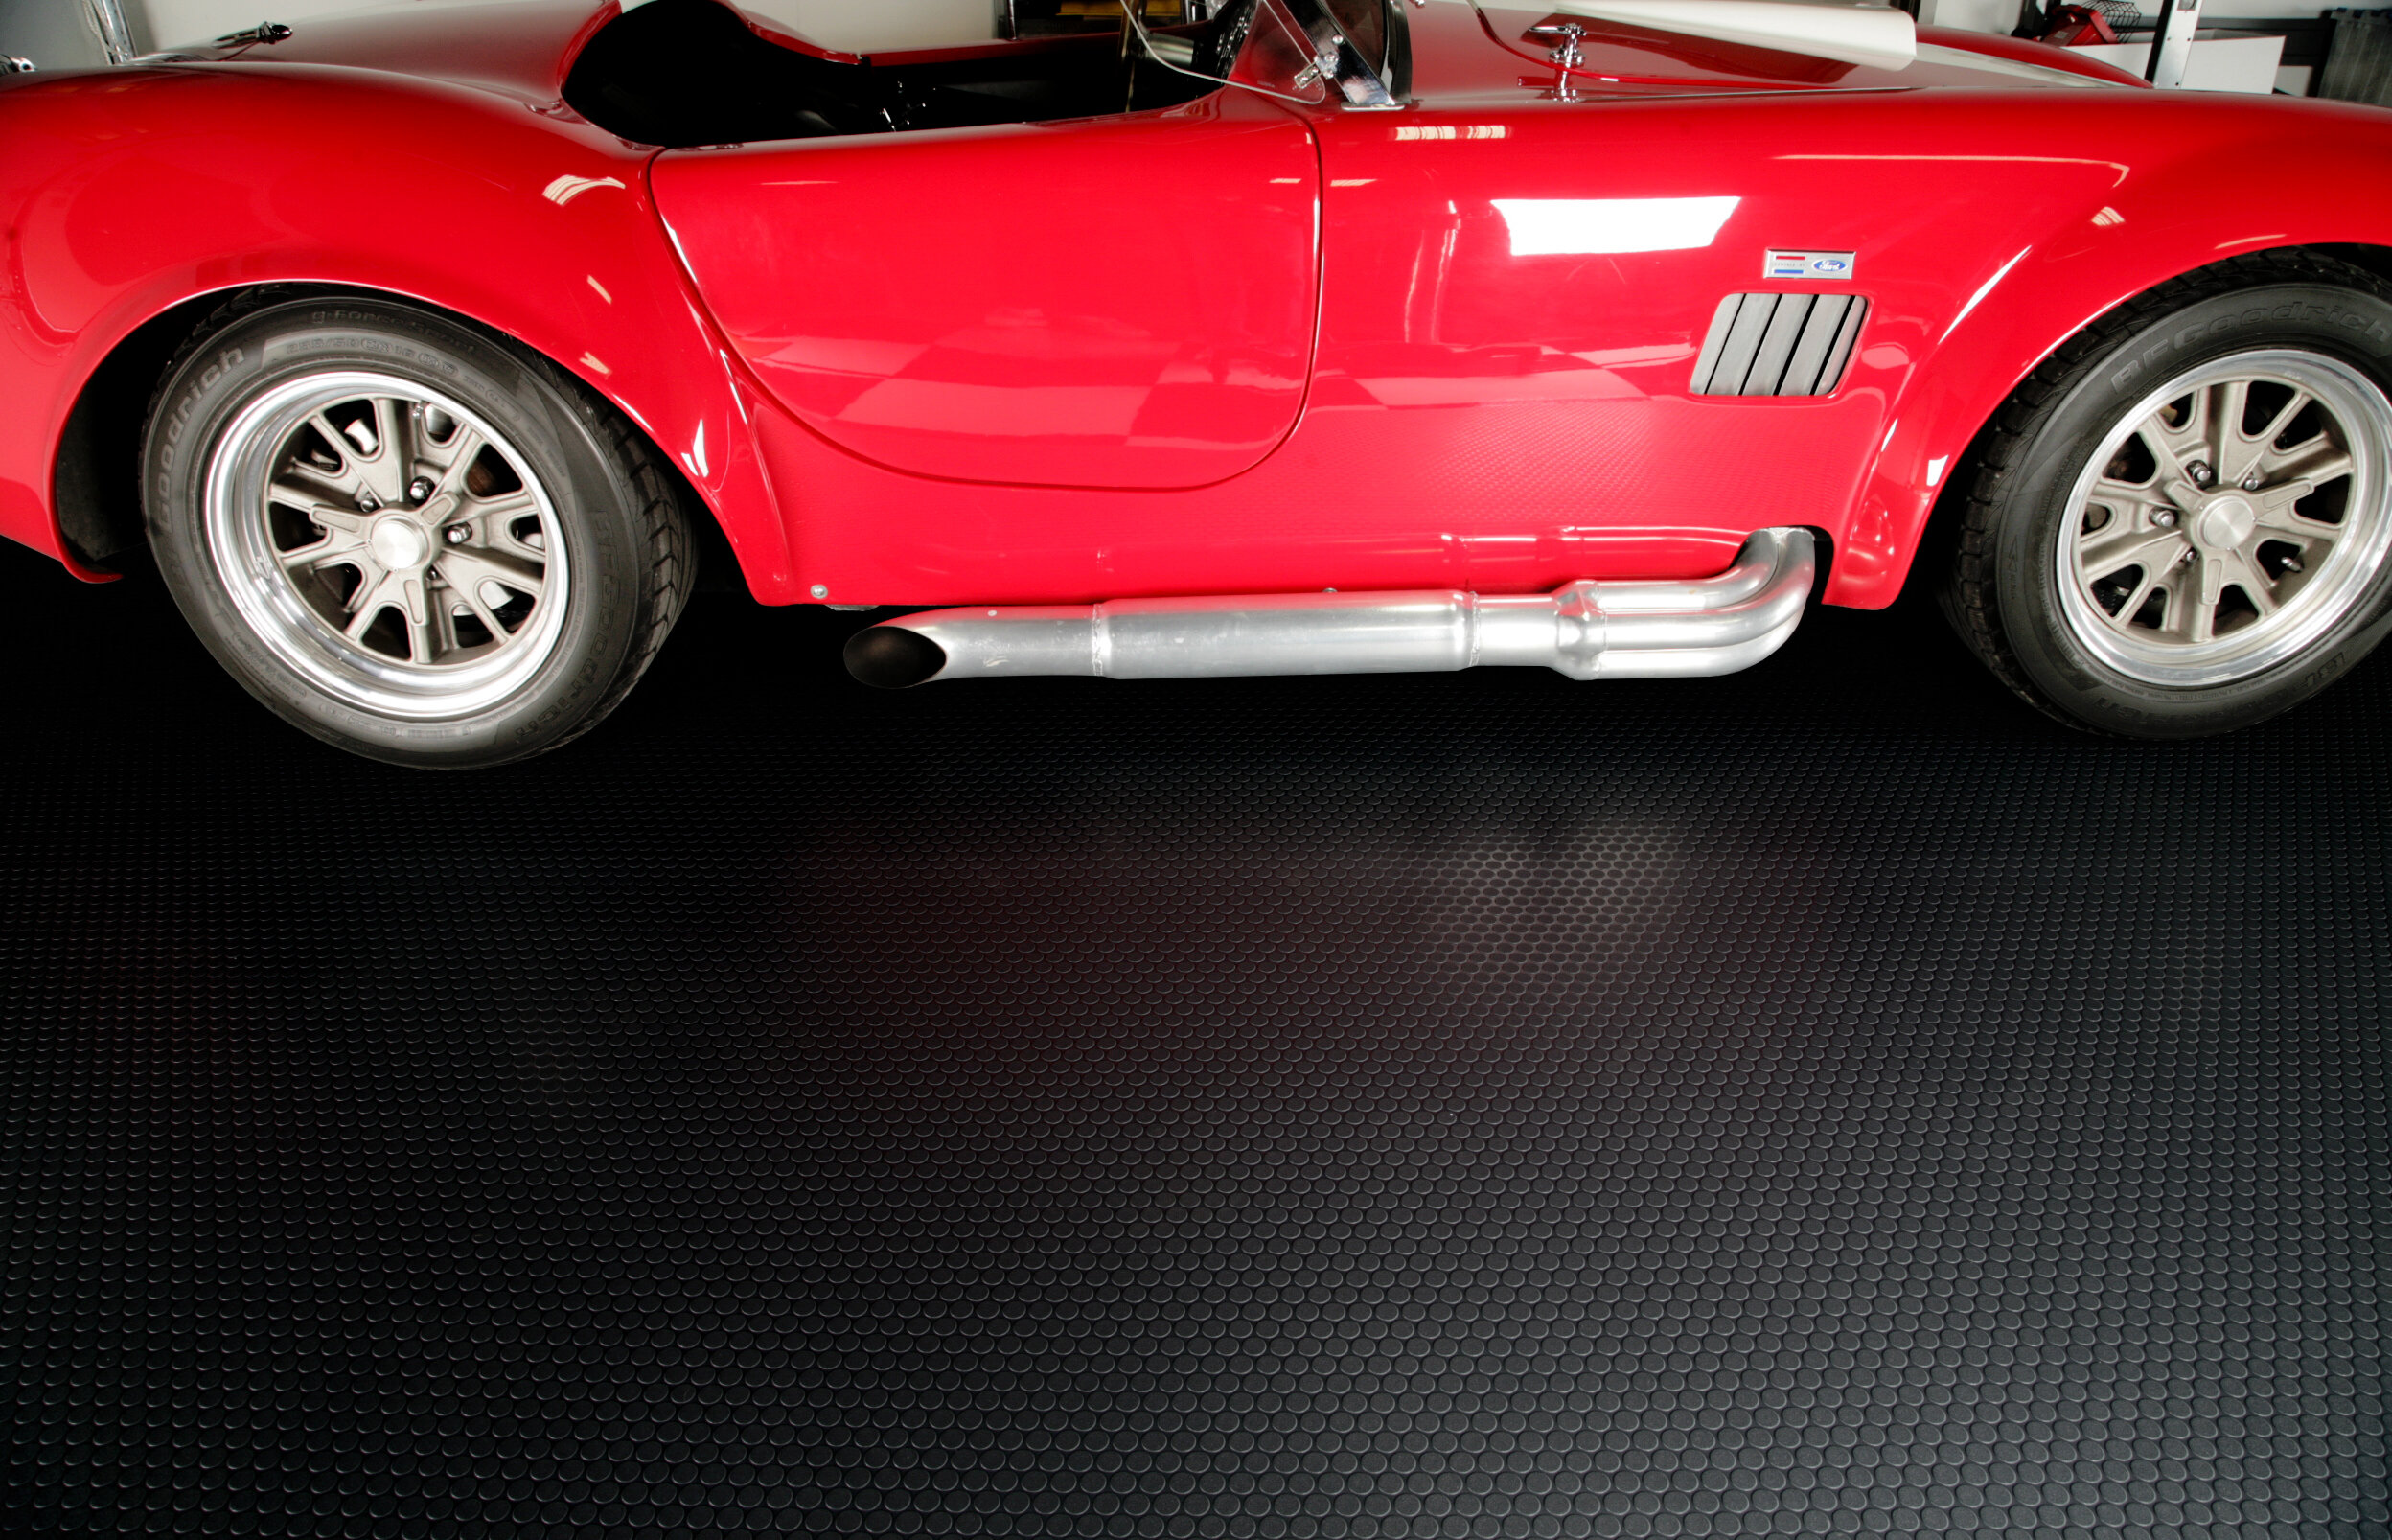 Buy Roof RO9 Roadster IRON Mat Black Red + Free Shipping!